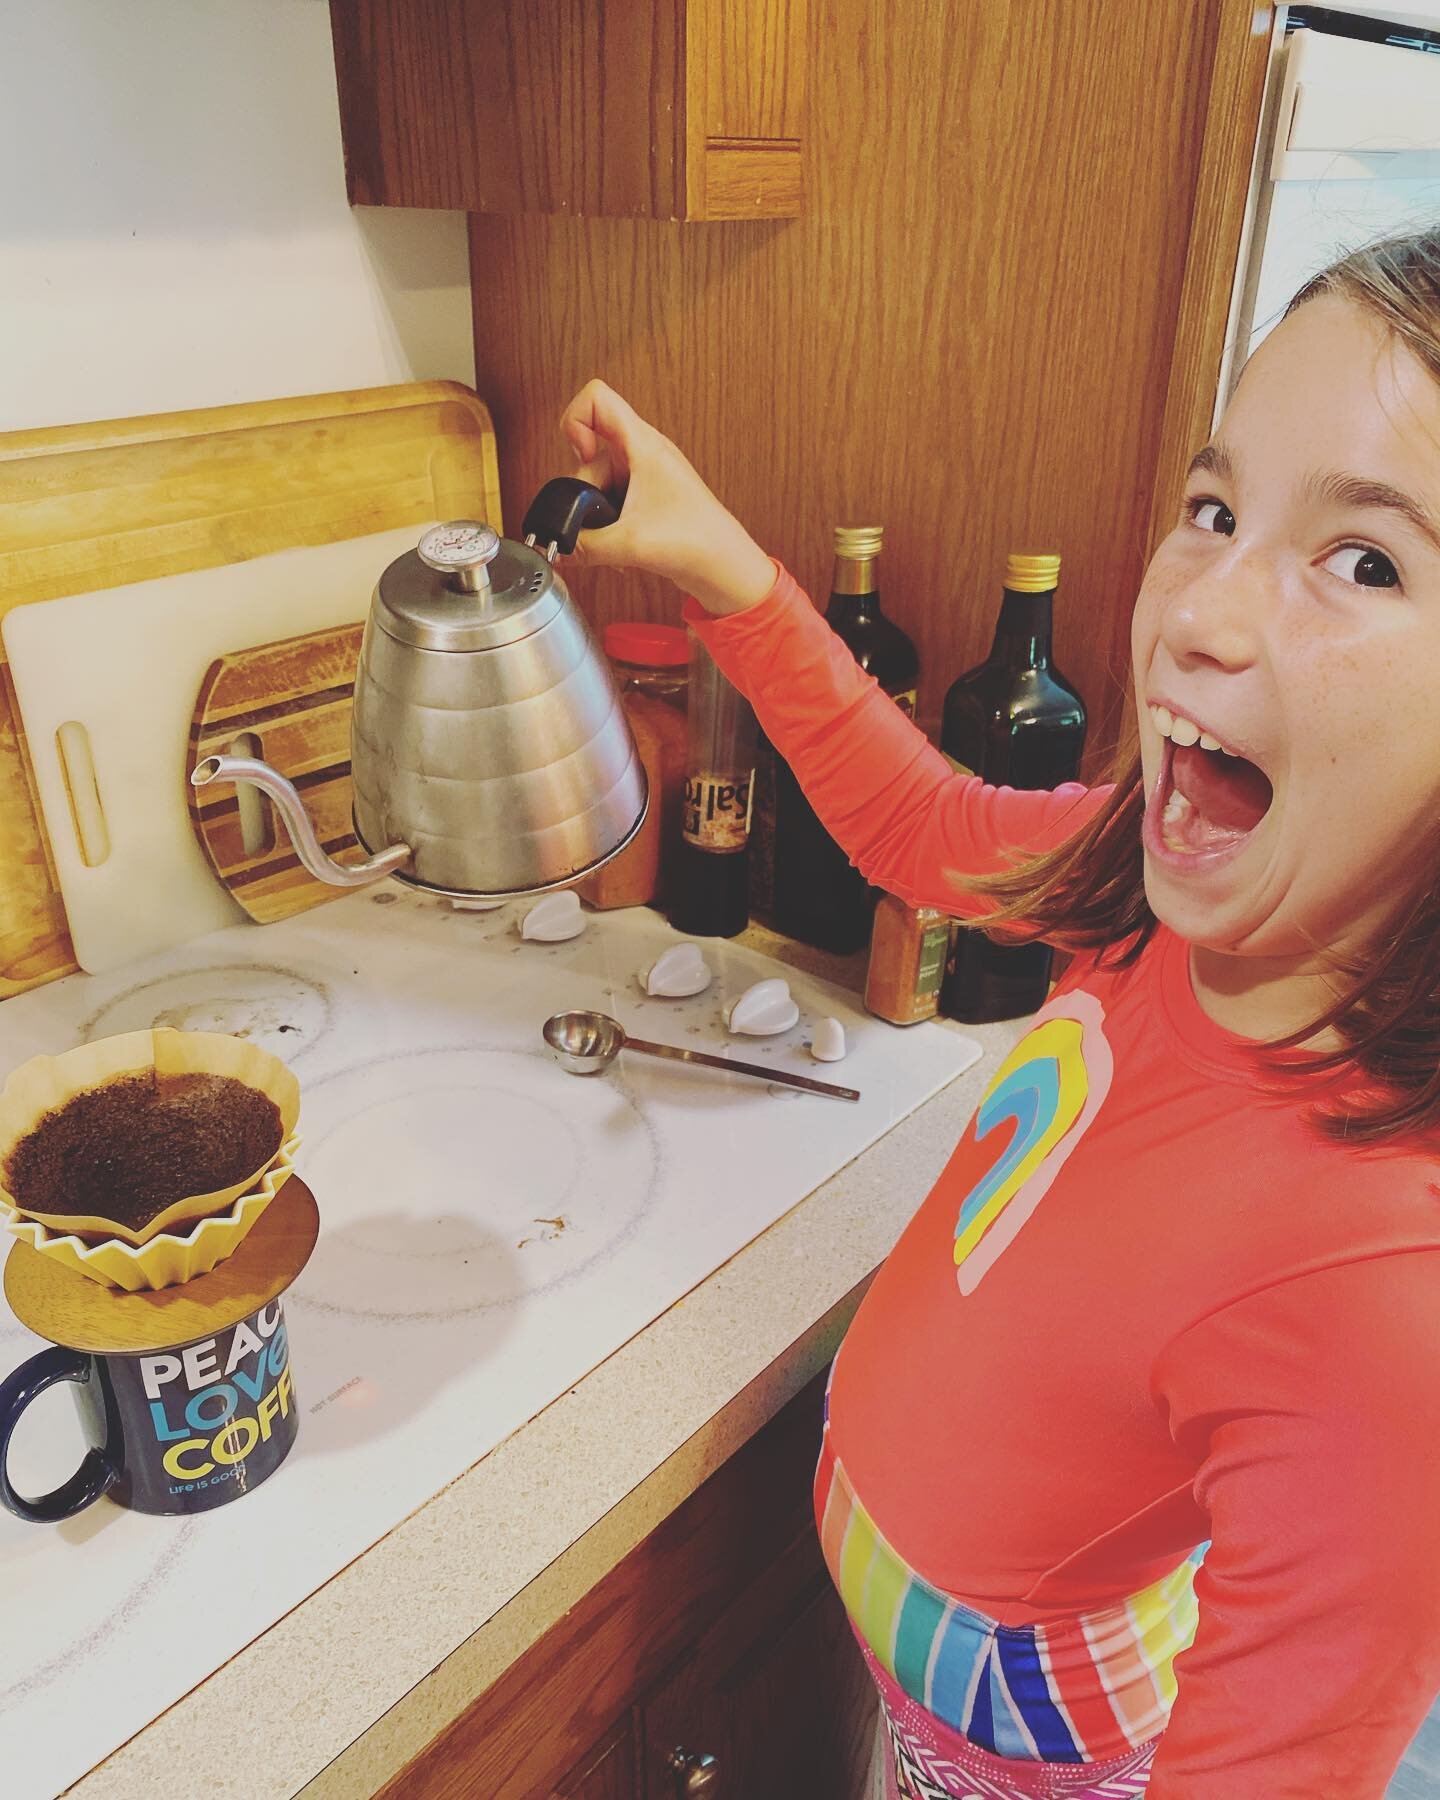 Charlotte is excited to work at St. Inie&rsquo;s but still has a few years 😉In the meantime, we are still looking for folks to join the team. Check out the application in our link bio if pouring coffee makes you this happy 😁#coffeehappiness #future